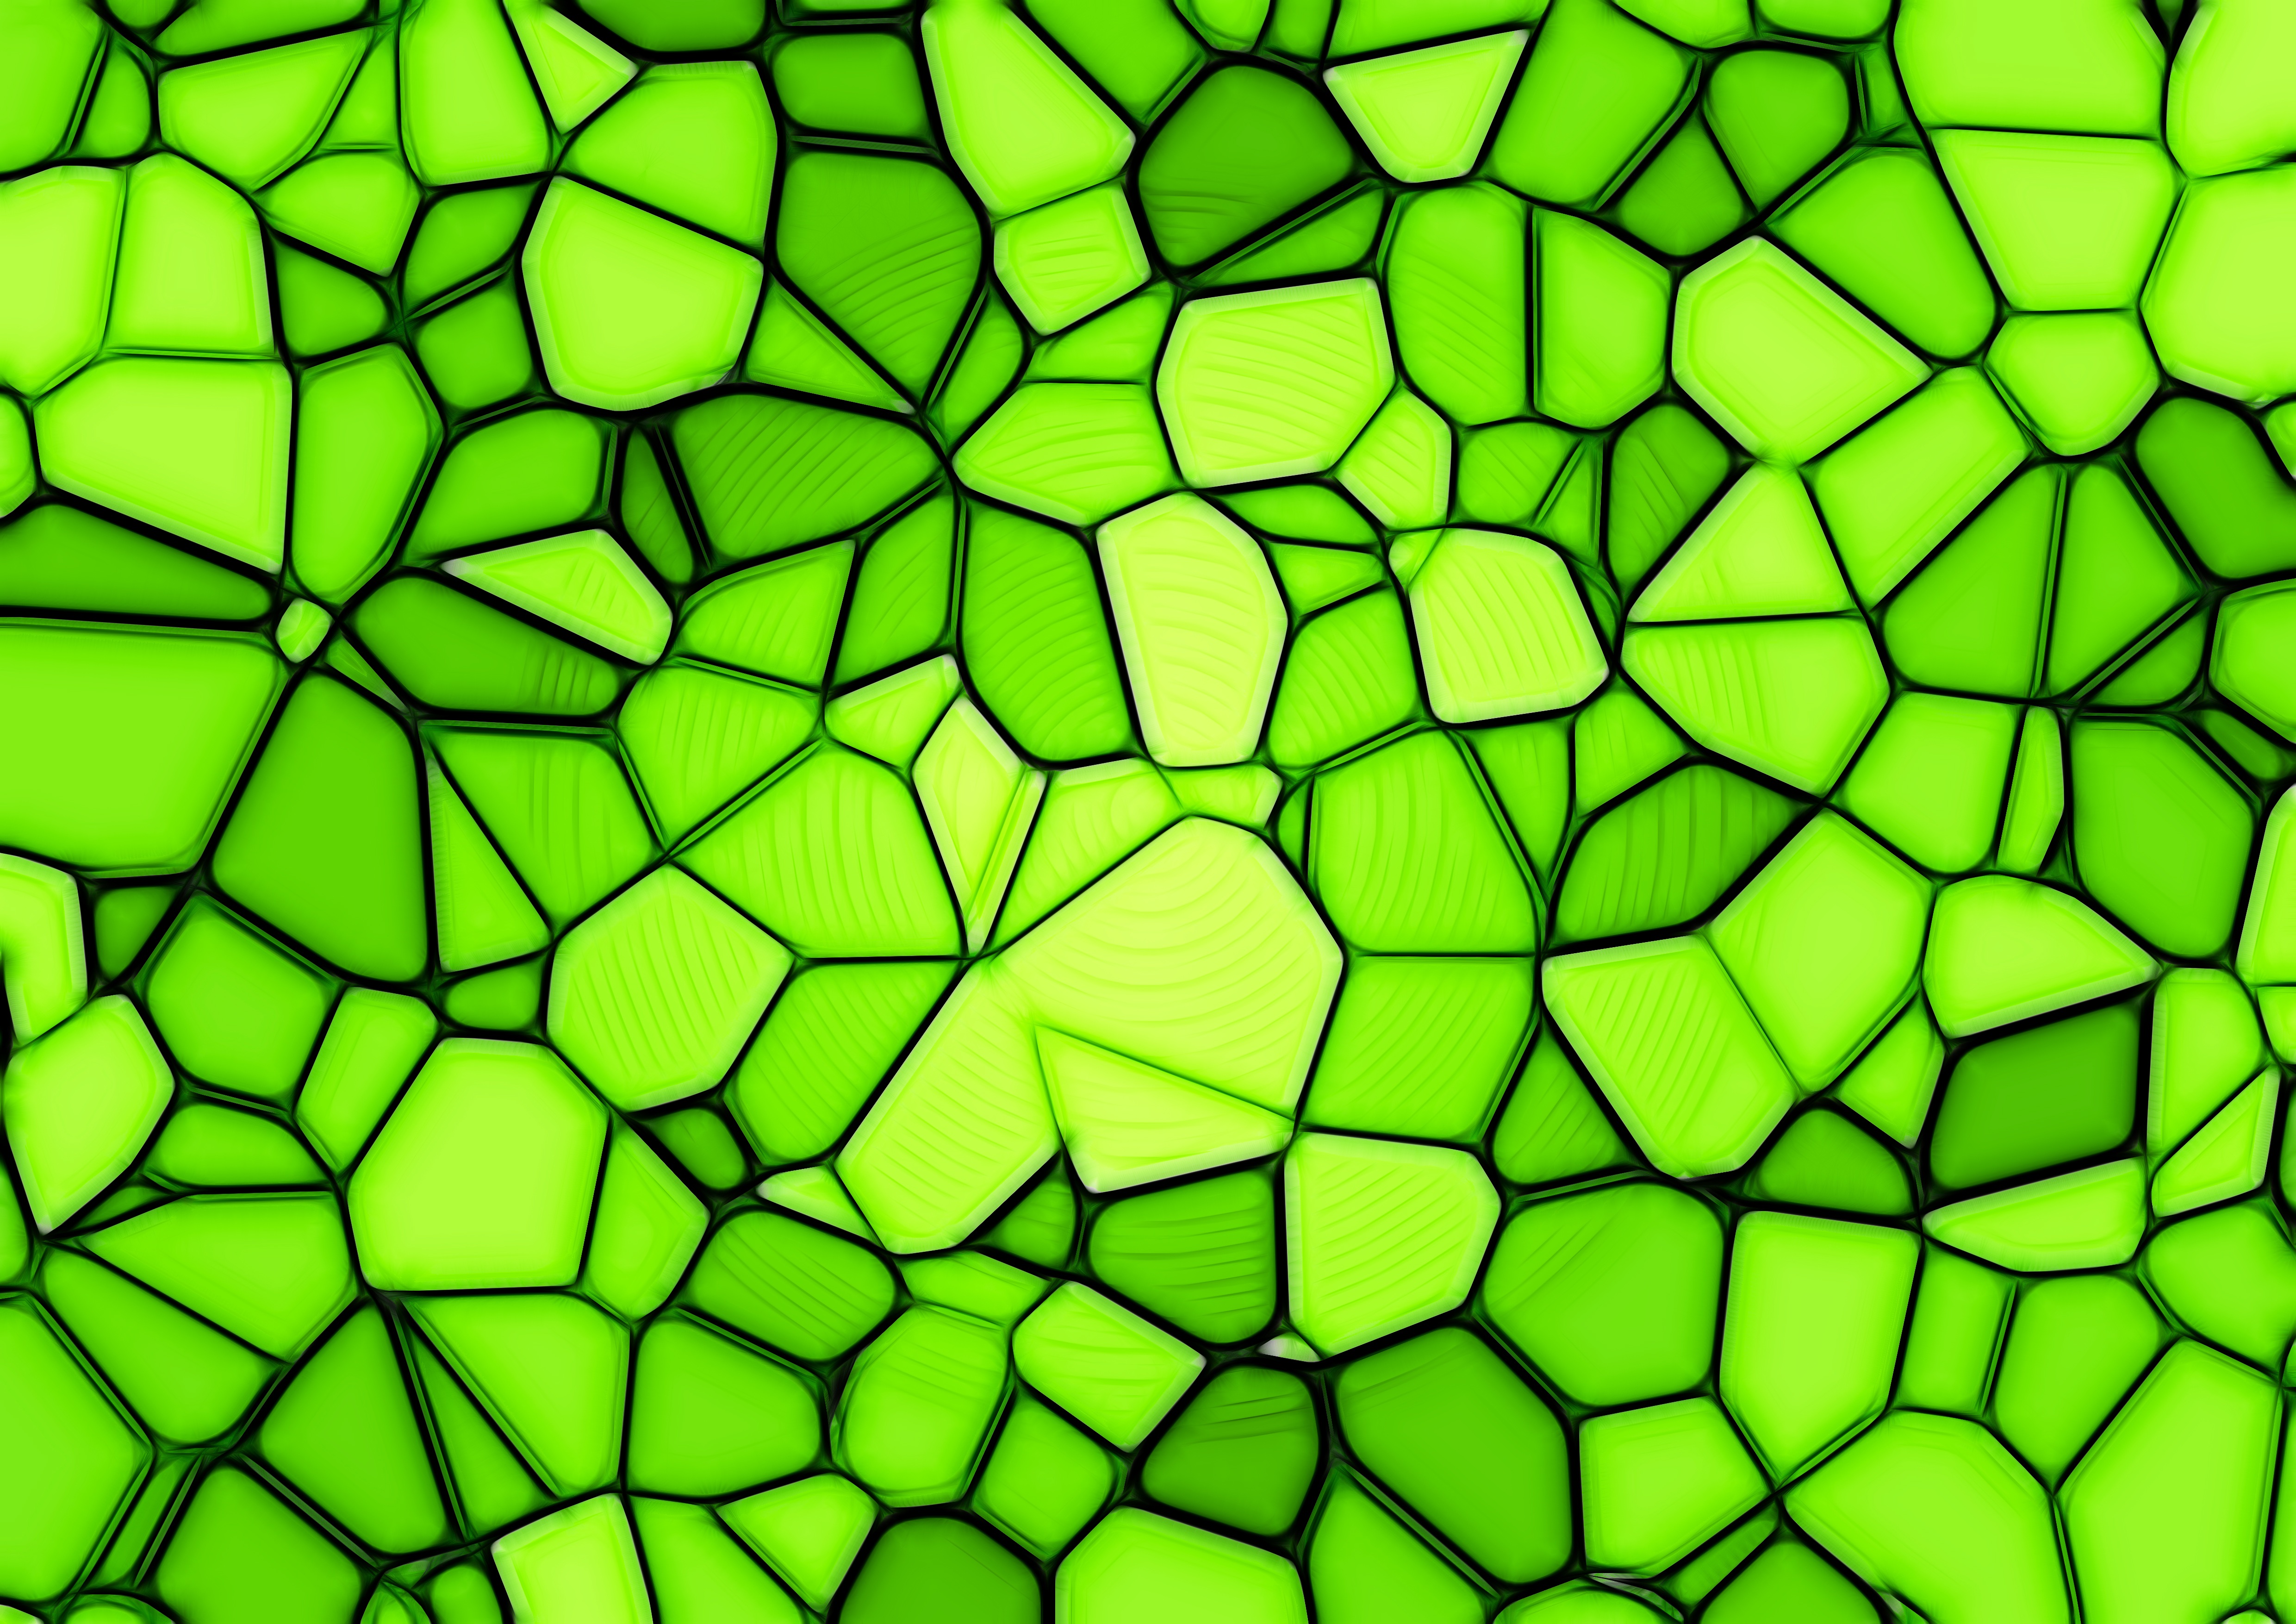 green, light green, texture, textures, triangles, salad, squares for android